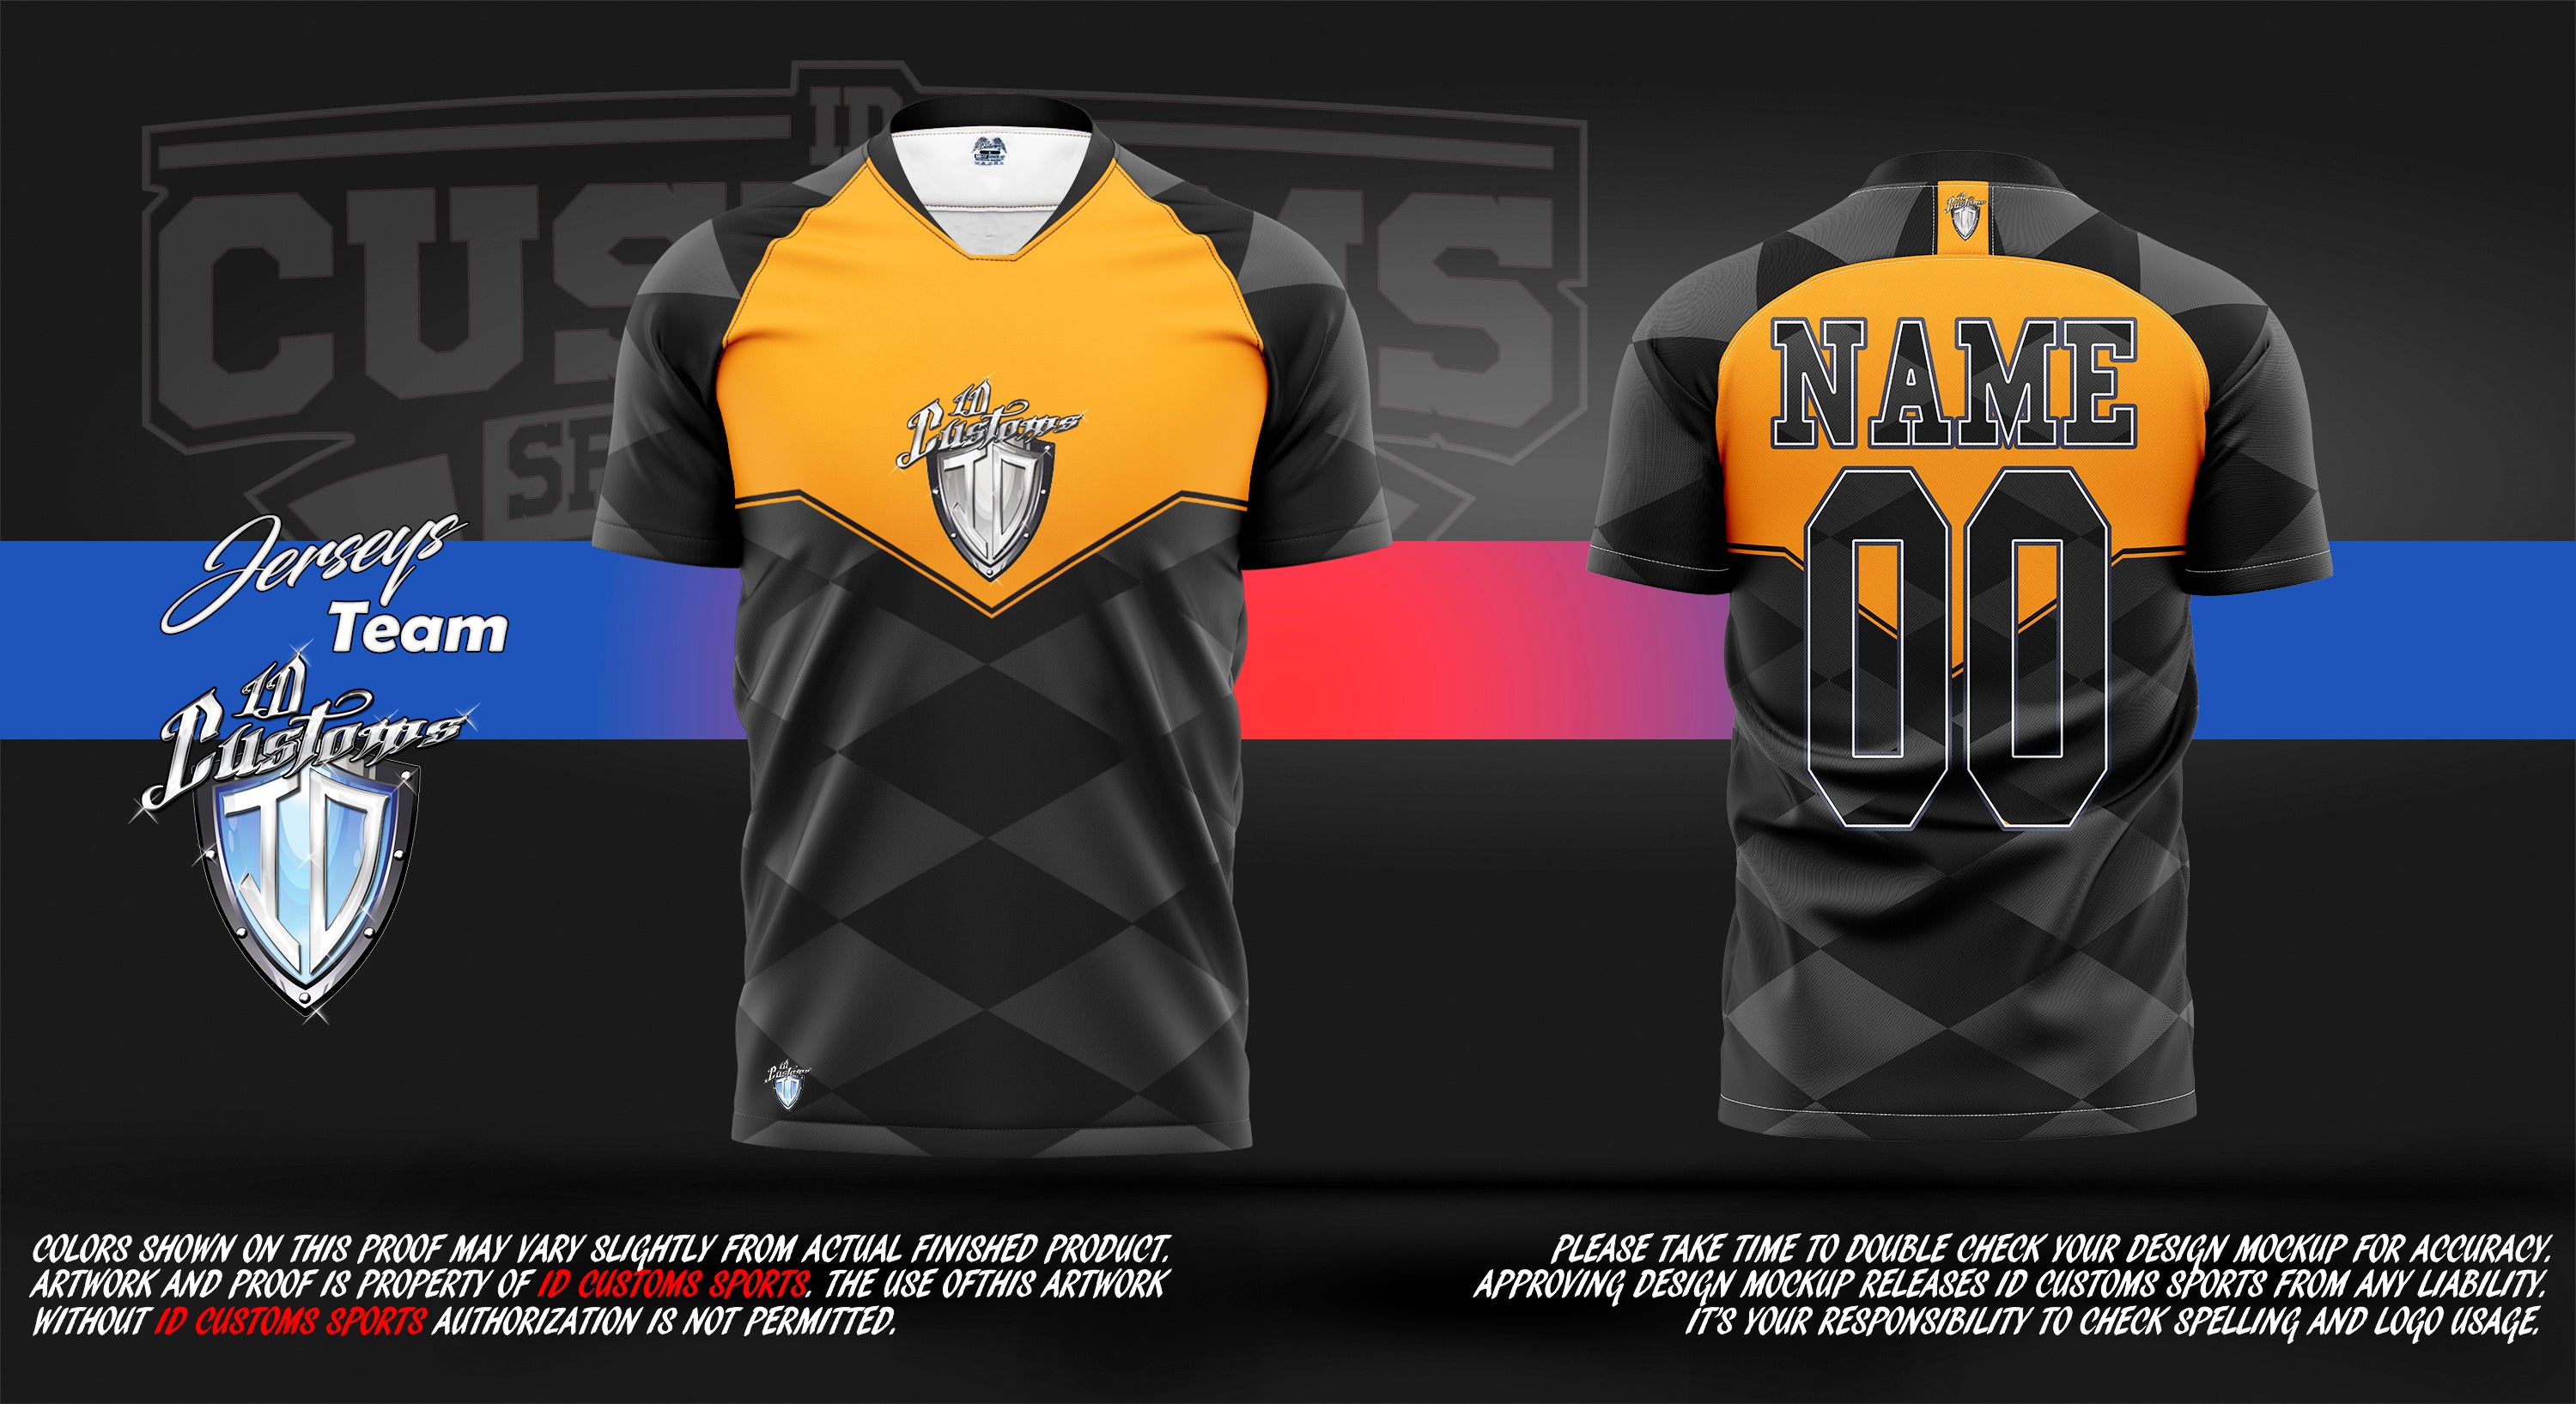 Customized jersey design for esports and sports use